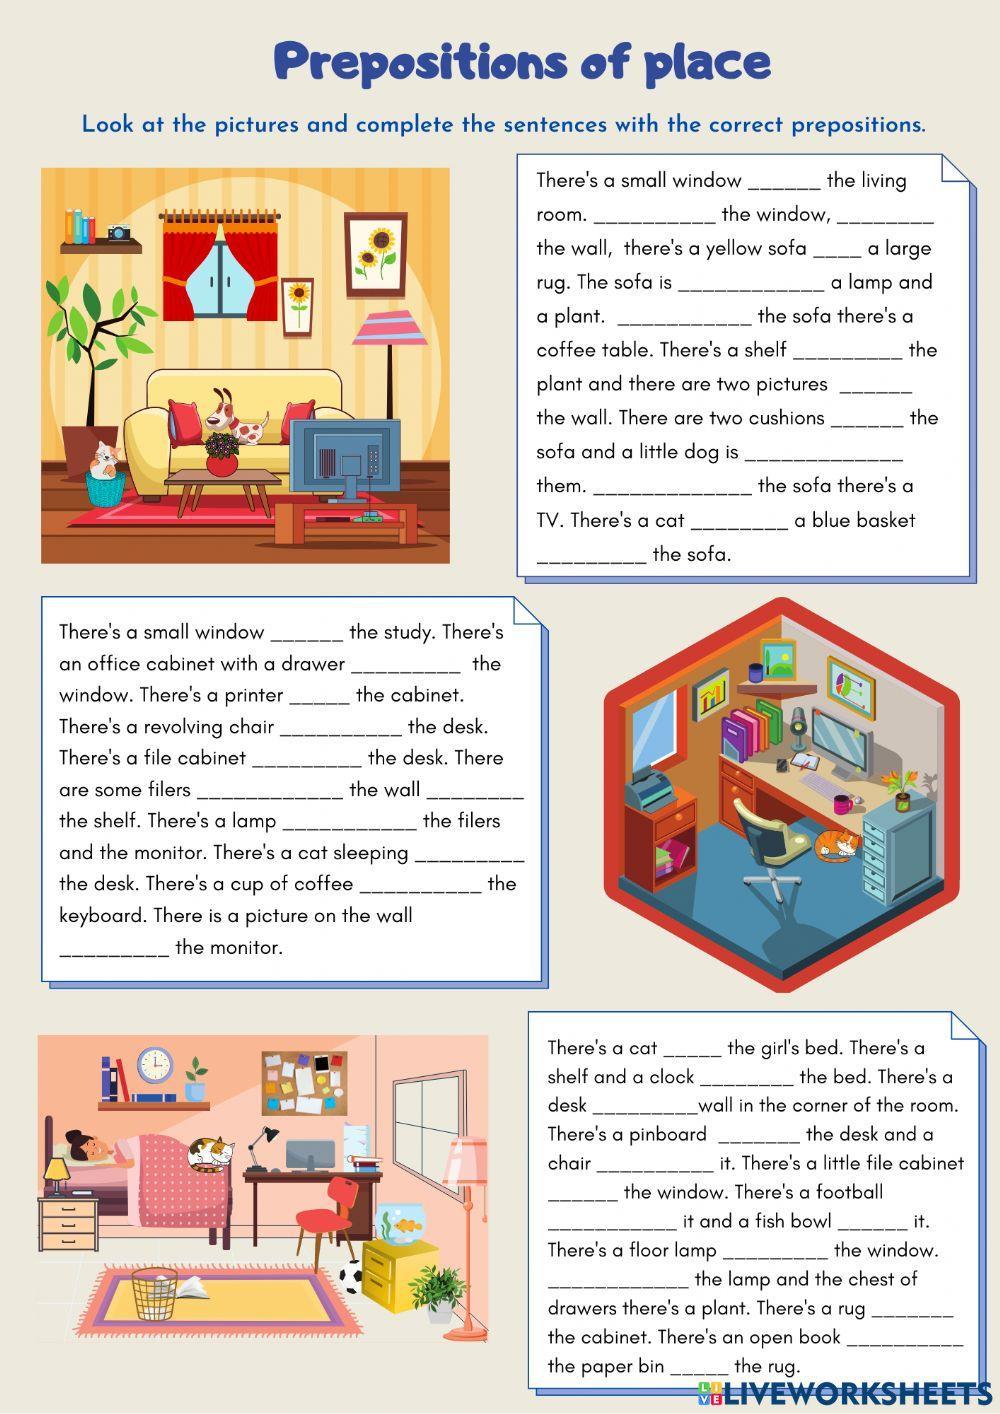 prepositions of place liveworksheets